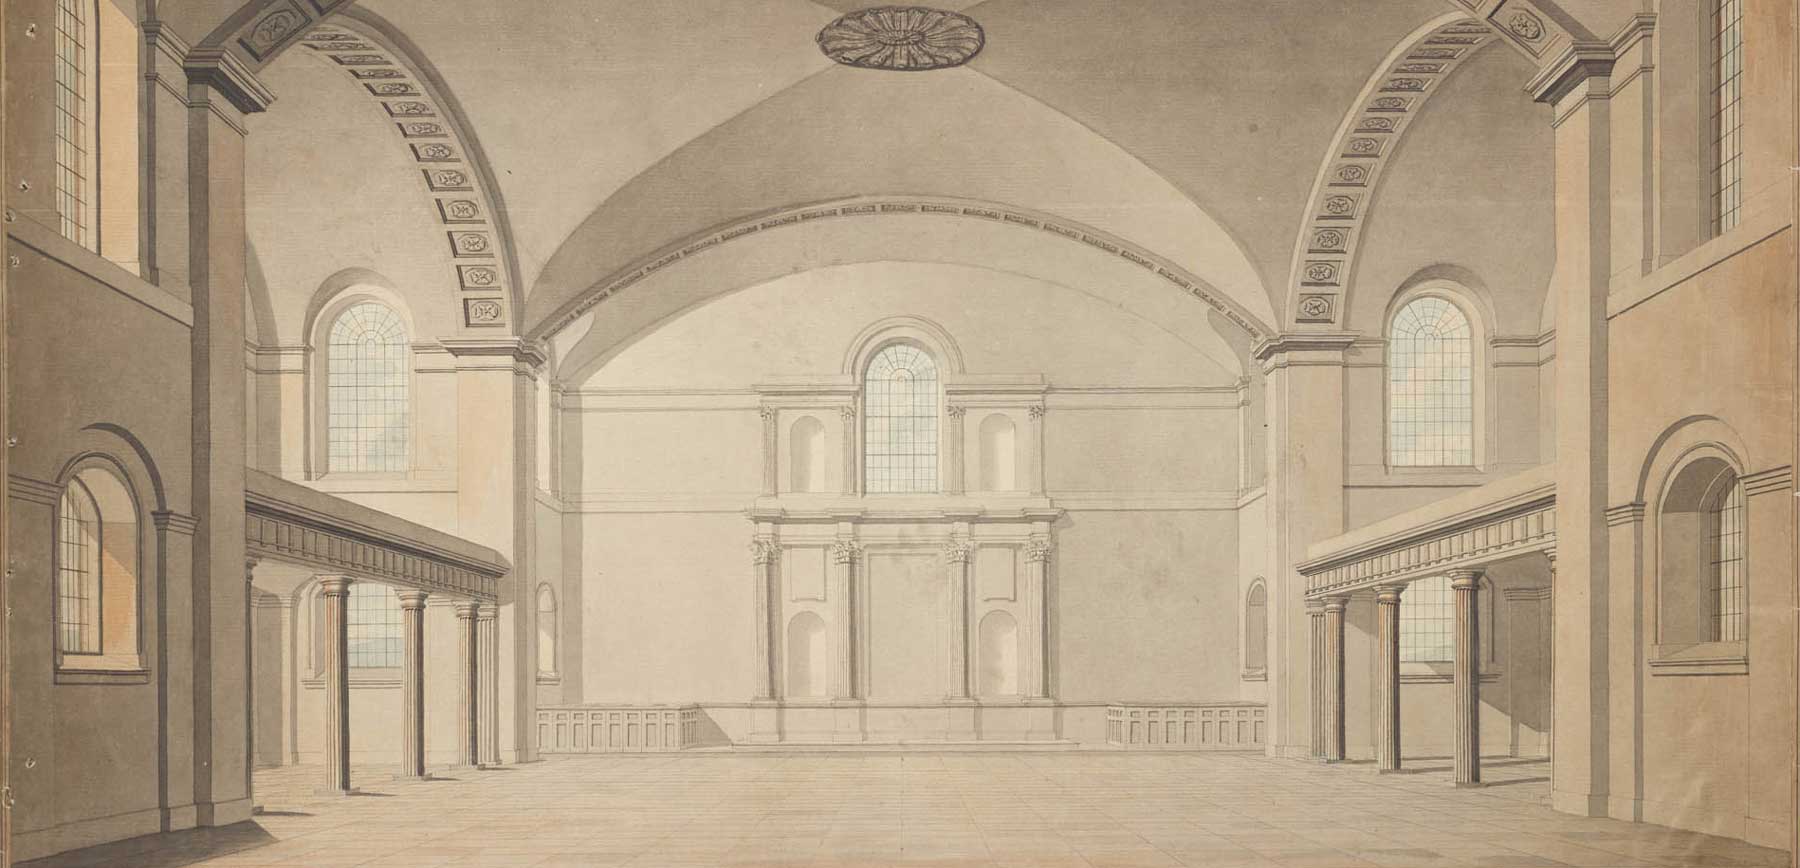 James Spiller's final design for the interior of the new Hackney Church